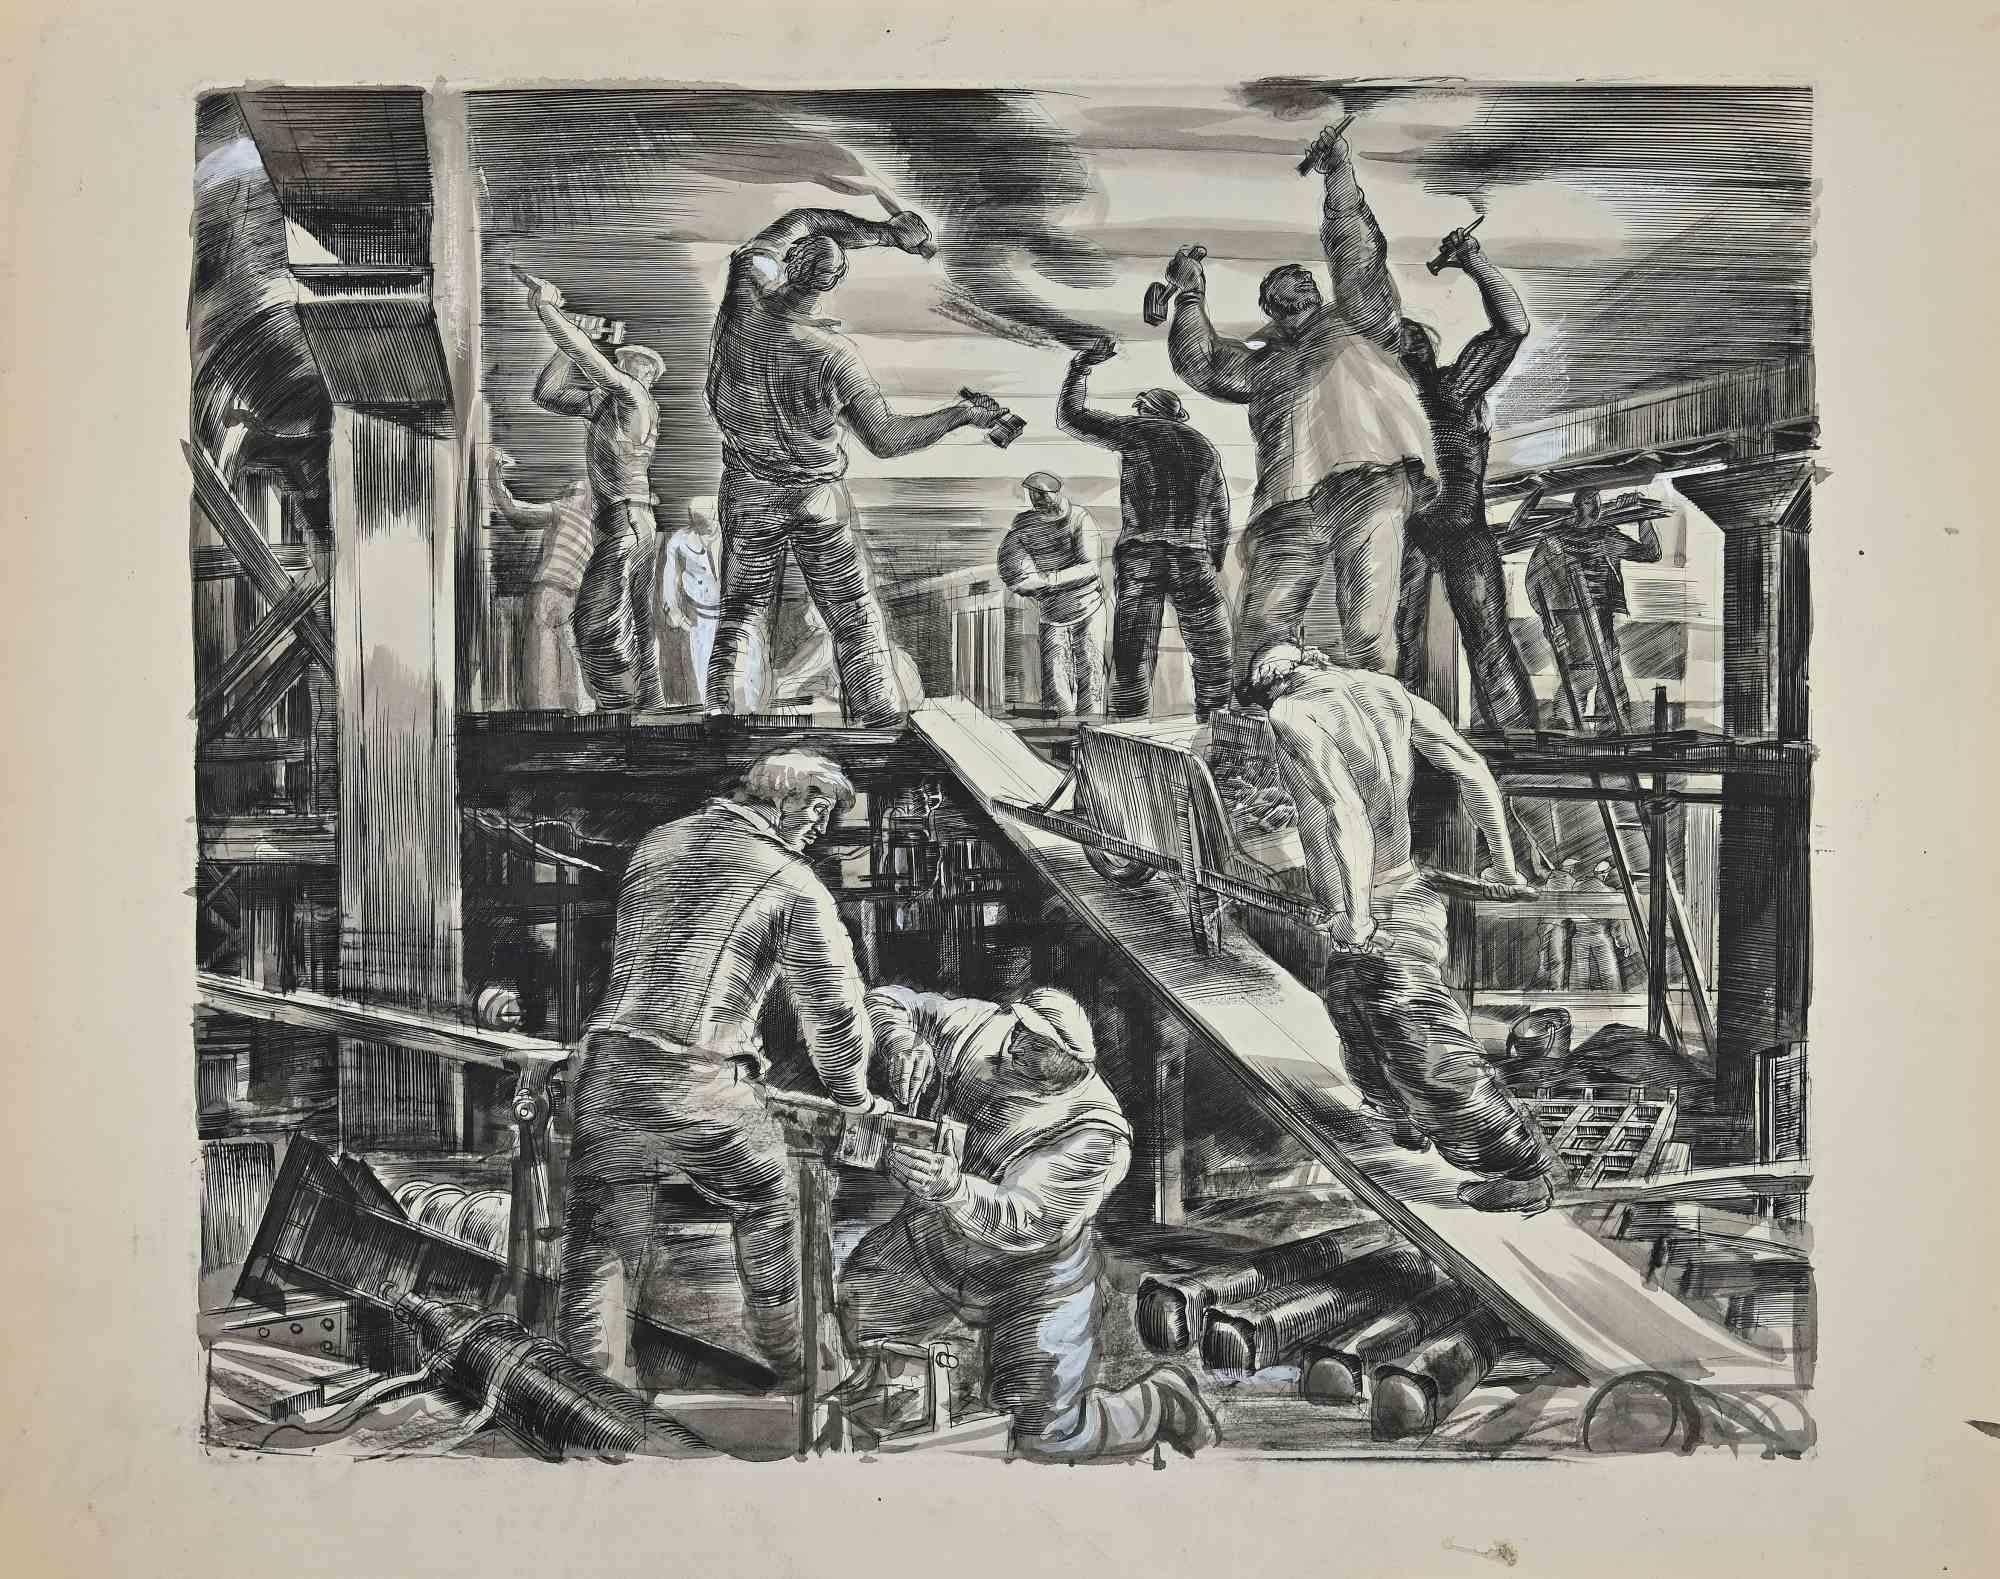 Albert Decaris Figurative Art - Workers - Ink and Watercolor - Mid-20th Century